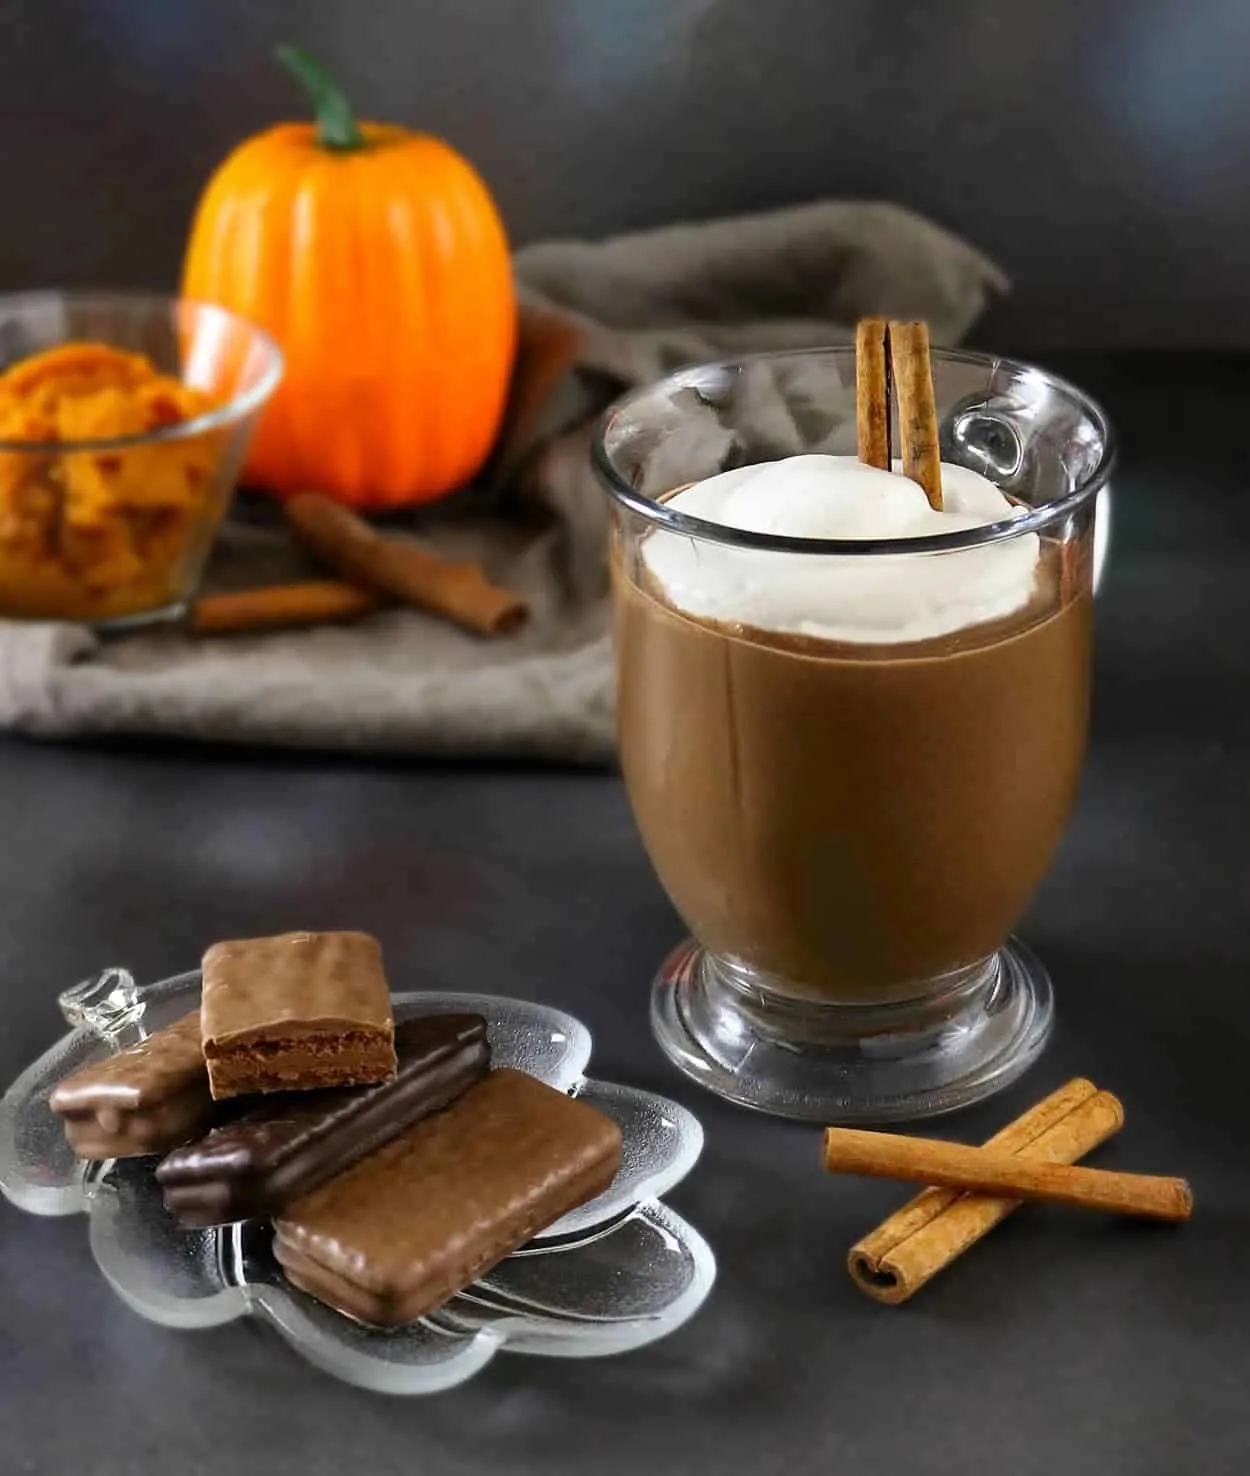 Pumpkin Spice Hot Chocolate perfect with Tim Tams #ad #TimTamFriends